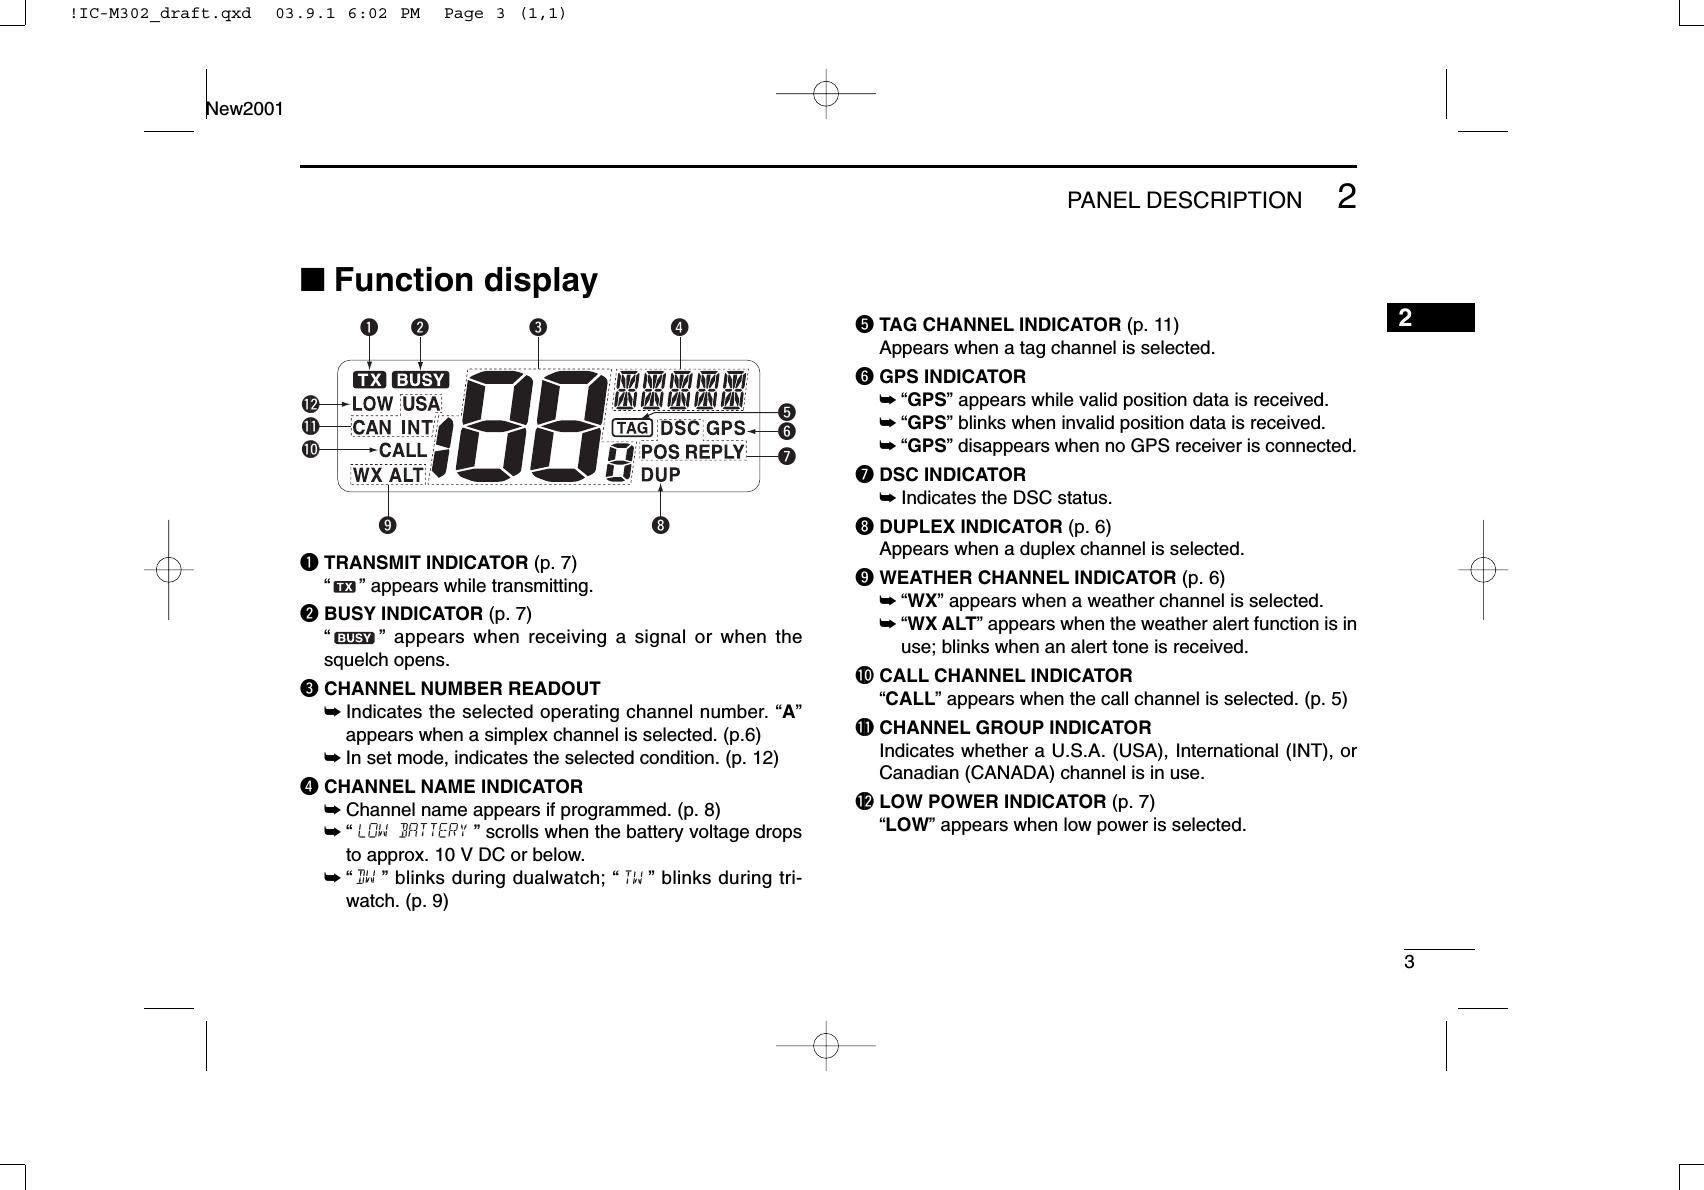 32PANEL DESCRIPTIONNew20012■Function displayqTRANSMIT INDICATOR (p. 7)“” appears while transmitting.wBUSY INDICATOR (p. 7)“” appears when receiving a signal or when thesquelch opens.eCHANNEL NUMBER READOUT➥Indicates the selected operating channel number. “A”appears when a simplex channel is selected. (p.6)➥In set mode, indicates the selected condition. (p. 12)rCHANNEL NAME INDICATOR➥Channel name appears if programmed. (p. 8)➥“” scrolls when the battery voltage dropsto approx. 10 V DC or below.➥“” blinks during dualwatch; “” blinks during tri-watch. (p. 9)tTAG CHANNEL INDICATOR (p. 11)Appears when a tag channel is selected.yGPS INDICATOR➥“GPS” appears while valid position data is received.➥“GPS” blinks when invalid position data is received.➥“GPS” disappears when no GPS receiver is connected.uDSC INDICATOR➥Indicates the DSC status.iDUPLEX INDICATOR (p. 6)Appears when a duplex channel is selected.oWEATHER CHANNEL INDICATOR (p. 6)➥“WX” appears when a weather channel is selected.➥“WX ALT” appears when the weather alert function is inuse; blinks when an alert tone is received.!0 CALL CHANNEL INDICATOR“CALL” appears when the call channel is selected. (p. 5)!1 CHANNEL GROUP INDICATORIndicates whether a U.S.A. (USA), International (INT), orCanadian (CANADA) channel is in use.!2 LOW POWER INDICATOR (p. 7)“LOW” appears when low power is selected.twerquyio!0!2!1!IC-M302_draft.qxd  03.9.1 6:02 PM  Page 3 (1,1)